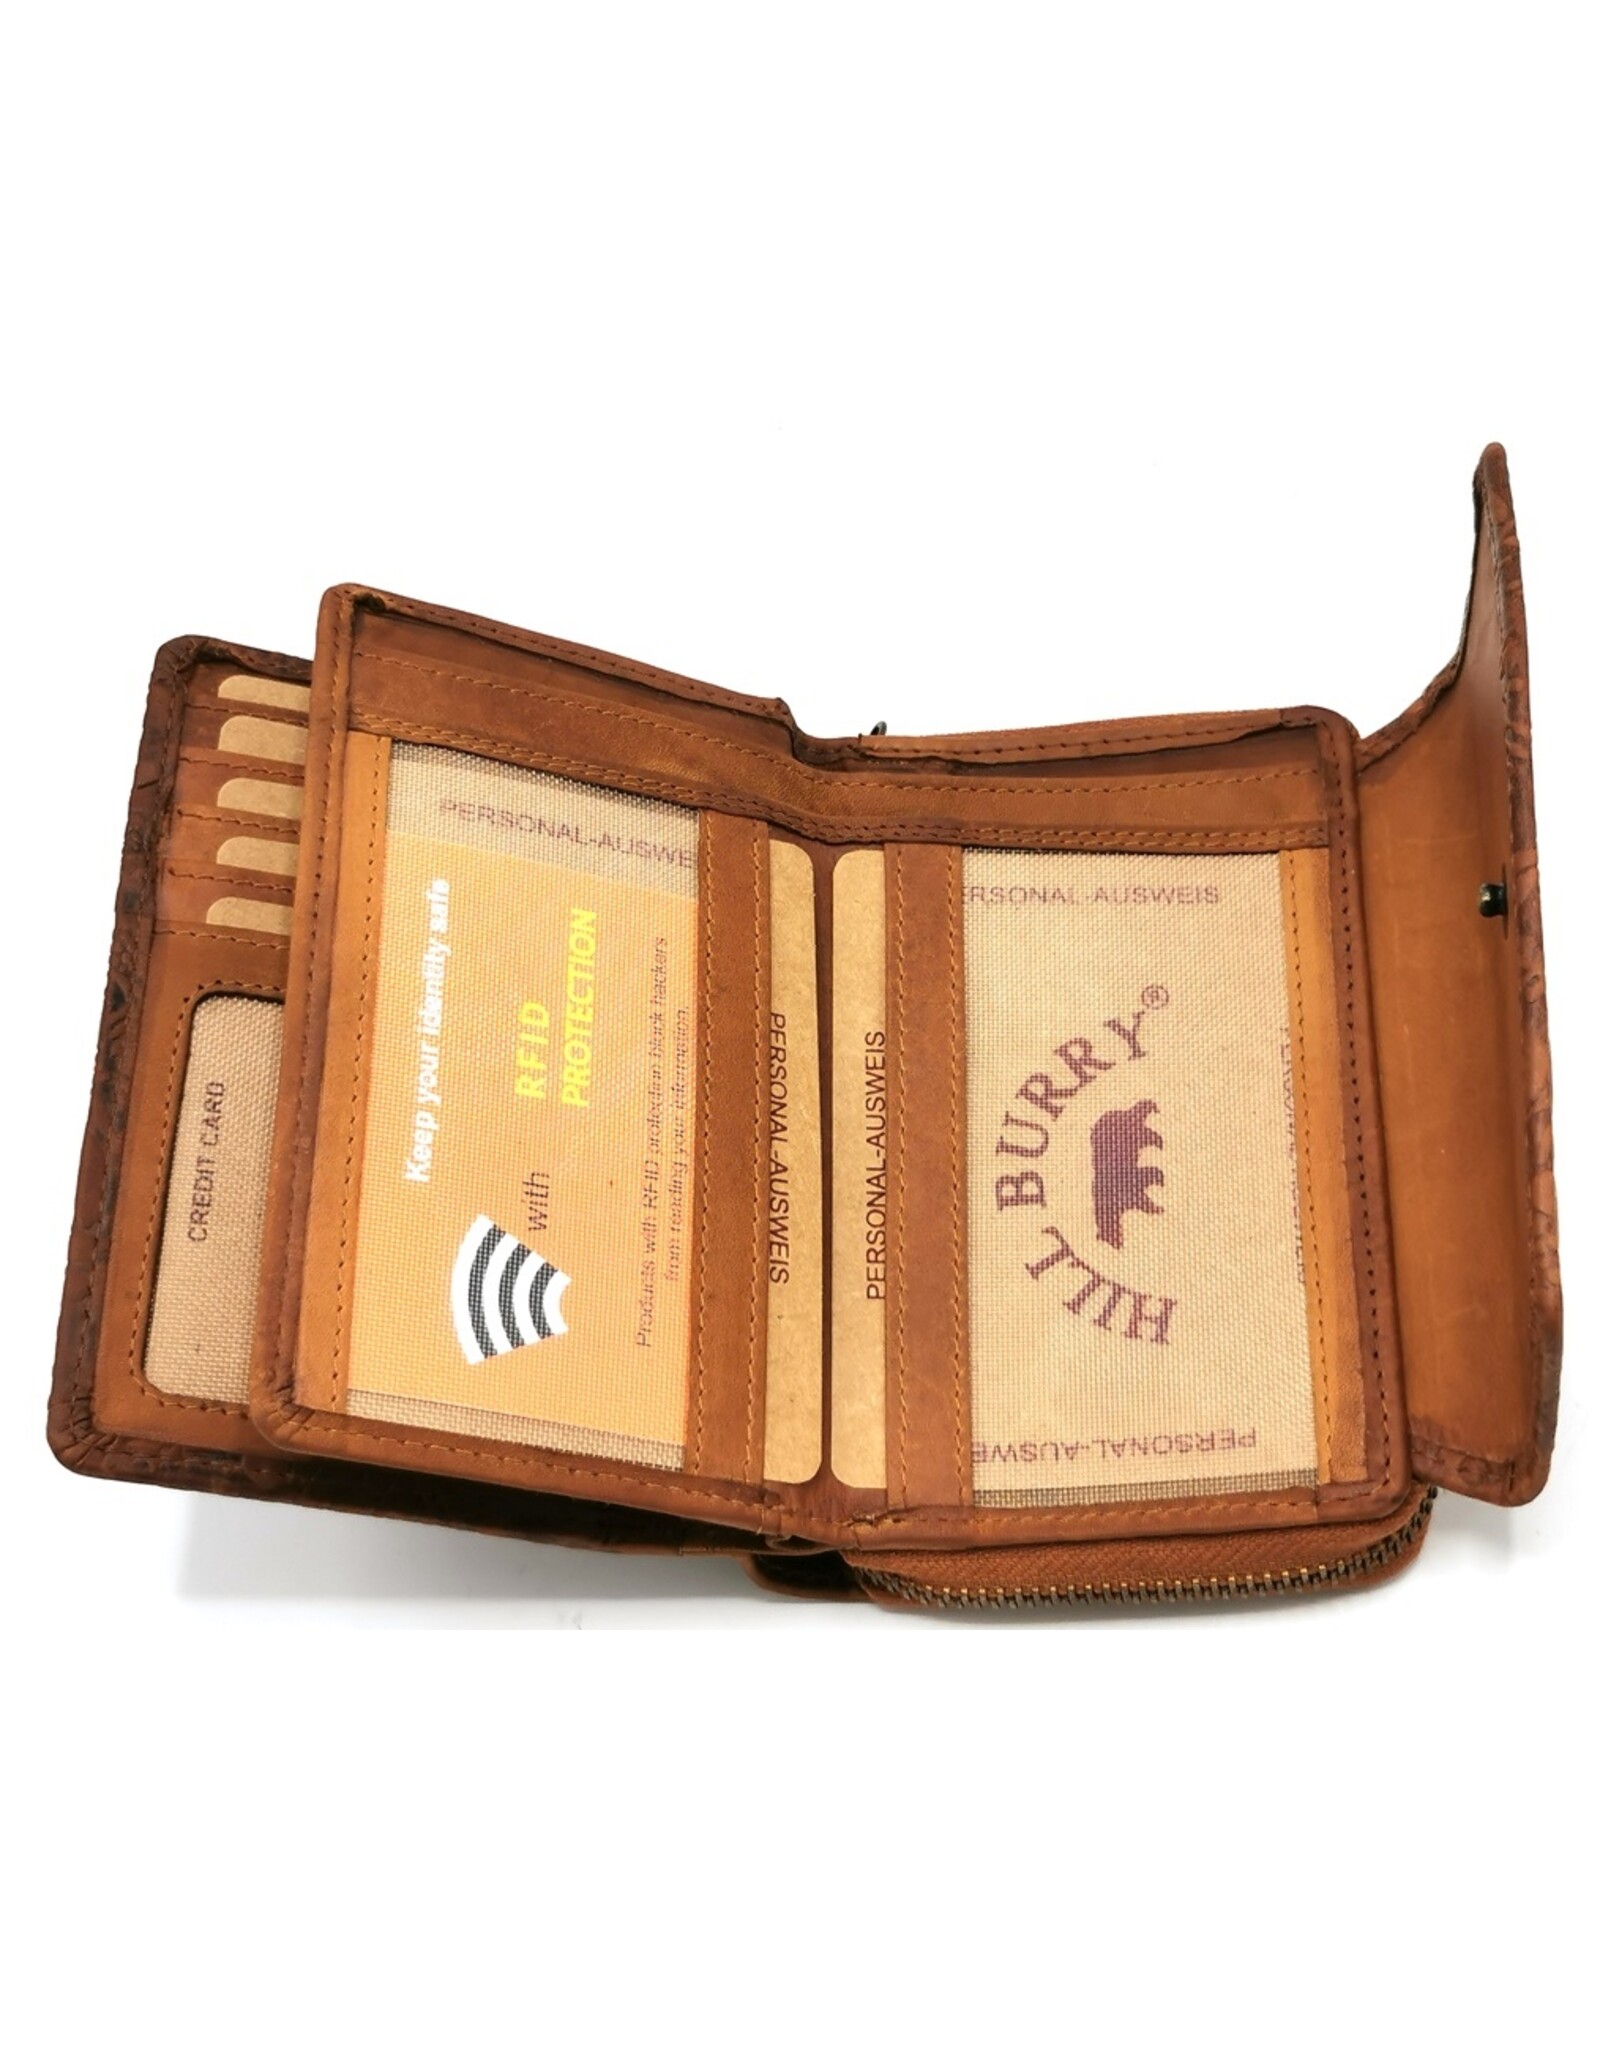 HillBurry Leather wallets - HillBurry Leather Wallet with Embossed Leaves tan